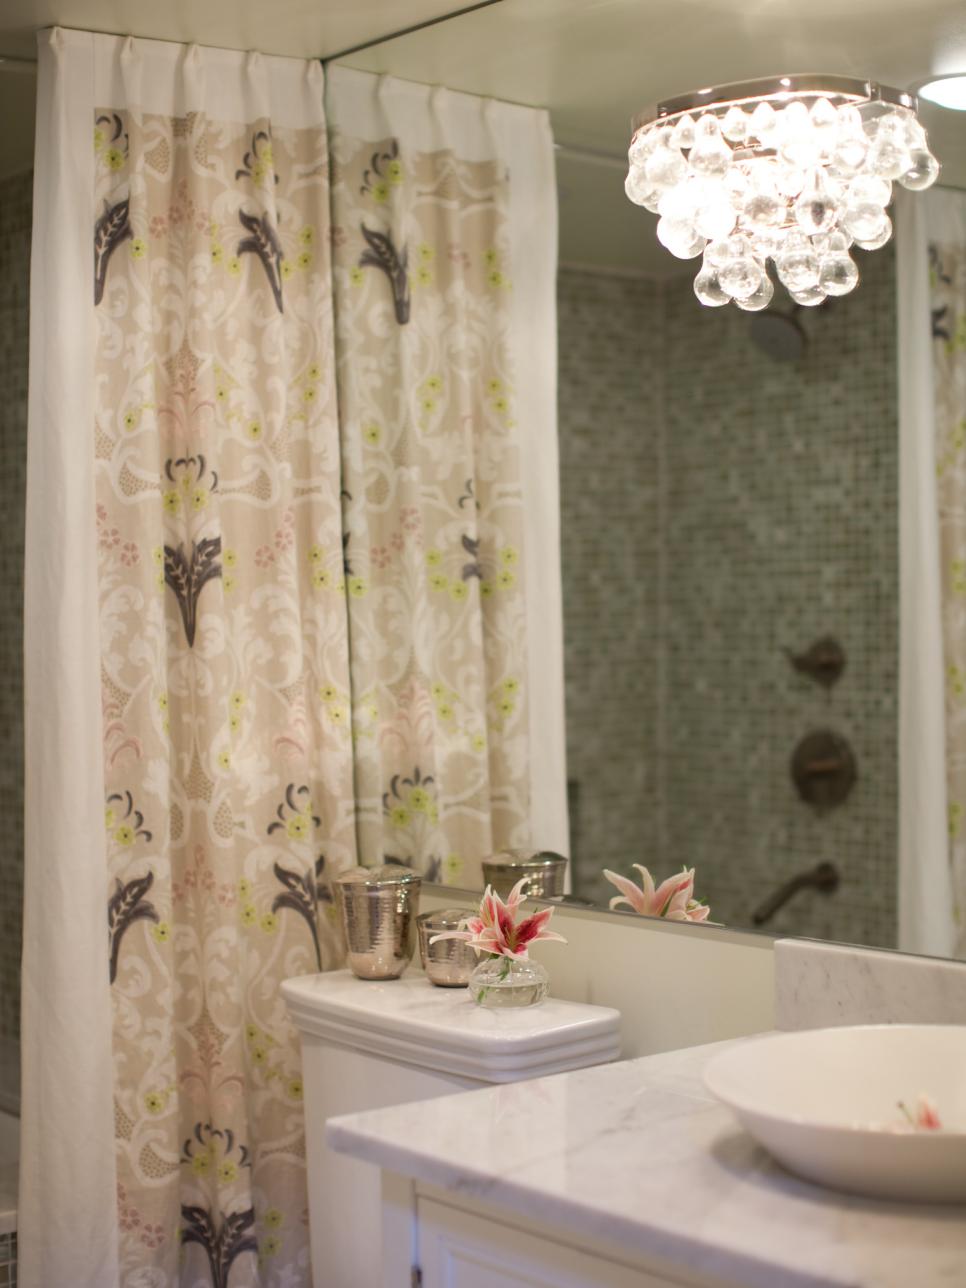 Contemporary Bathroom With Floral Shower Curtain and Teardrop Sconce